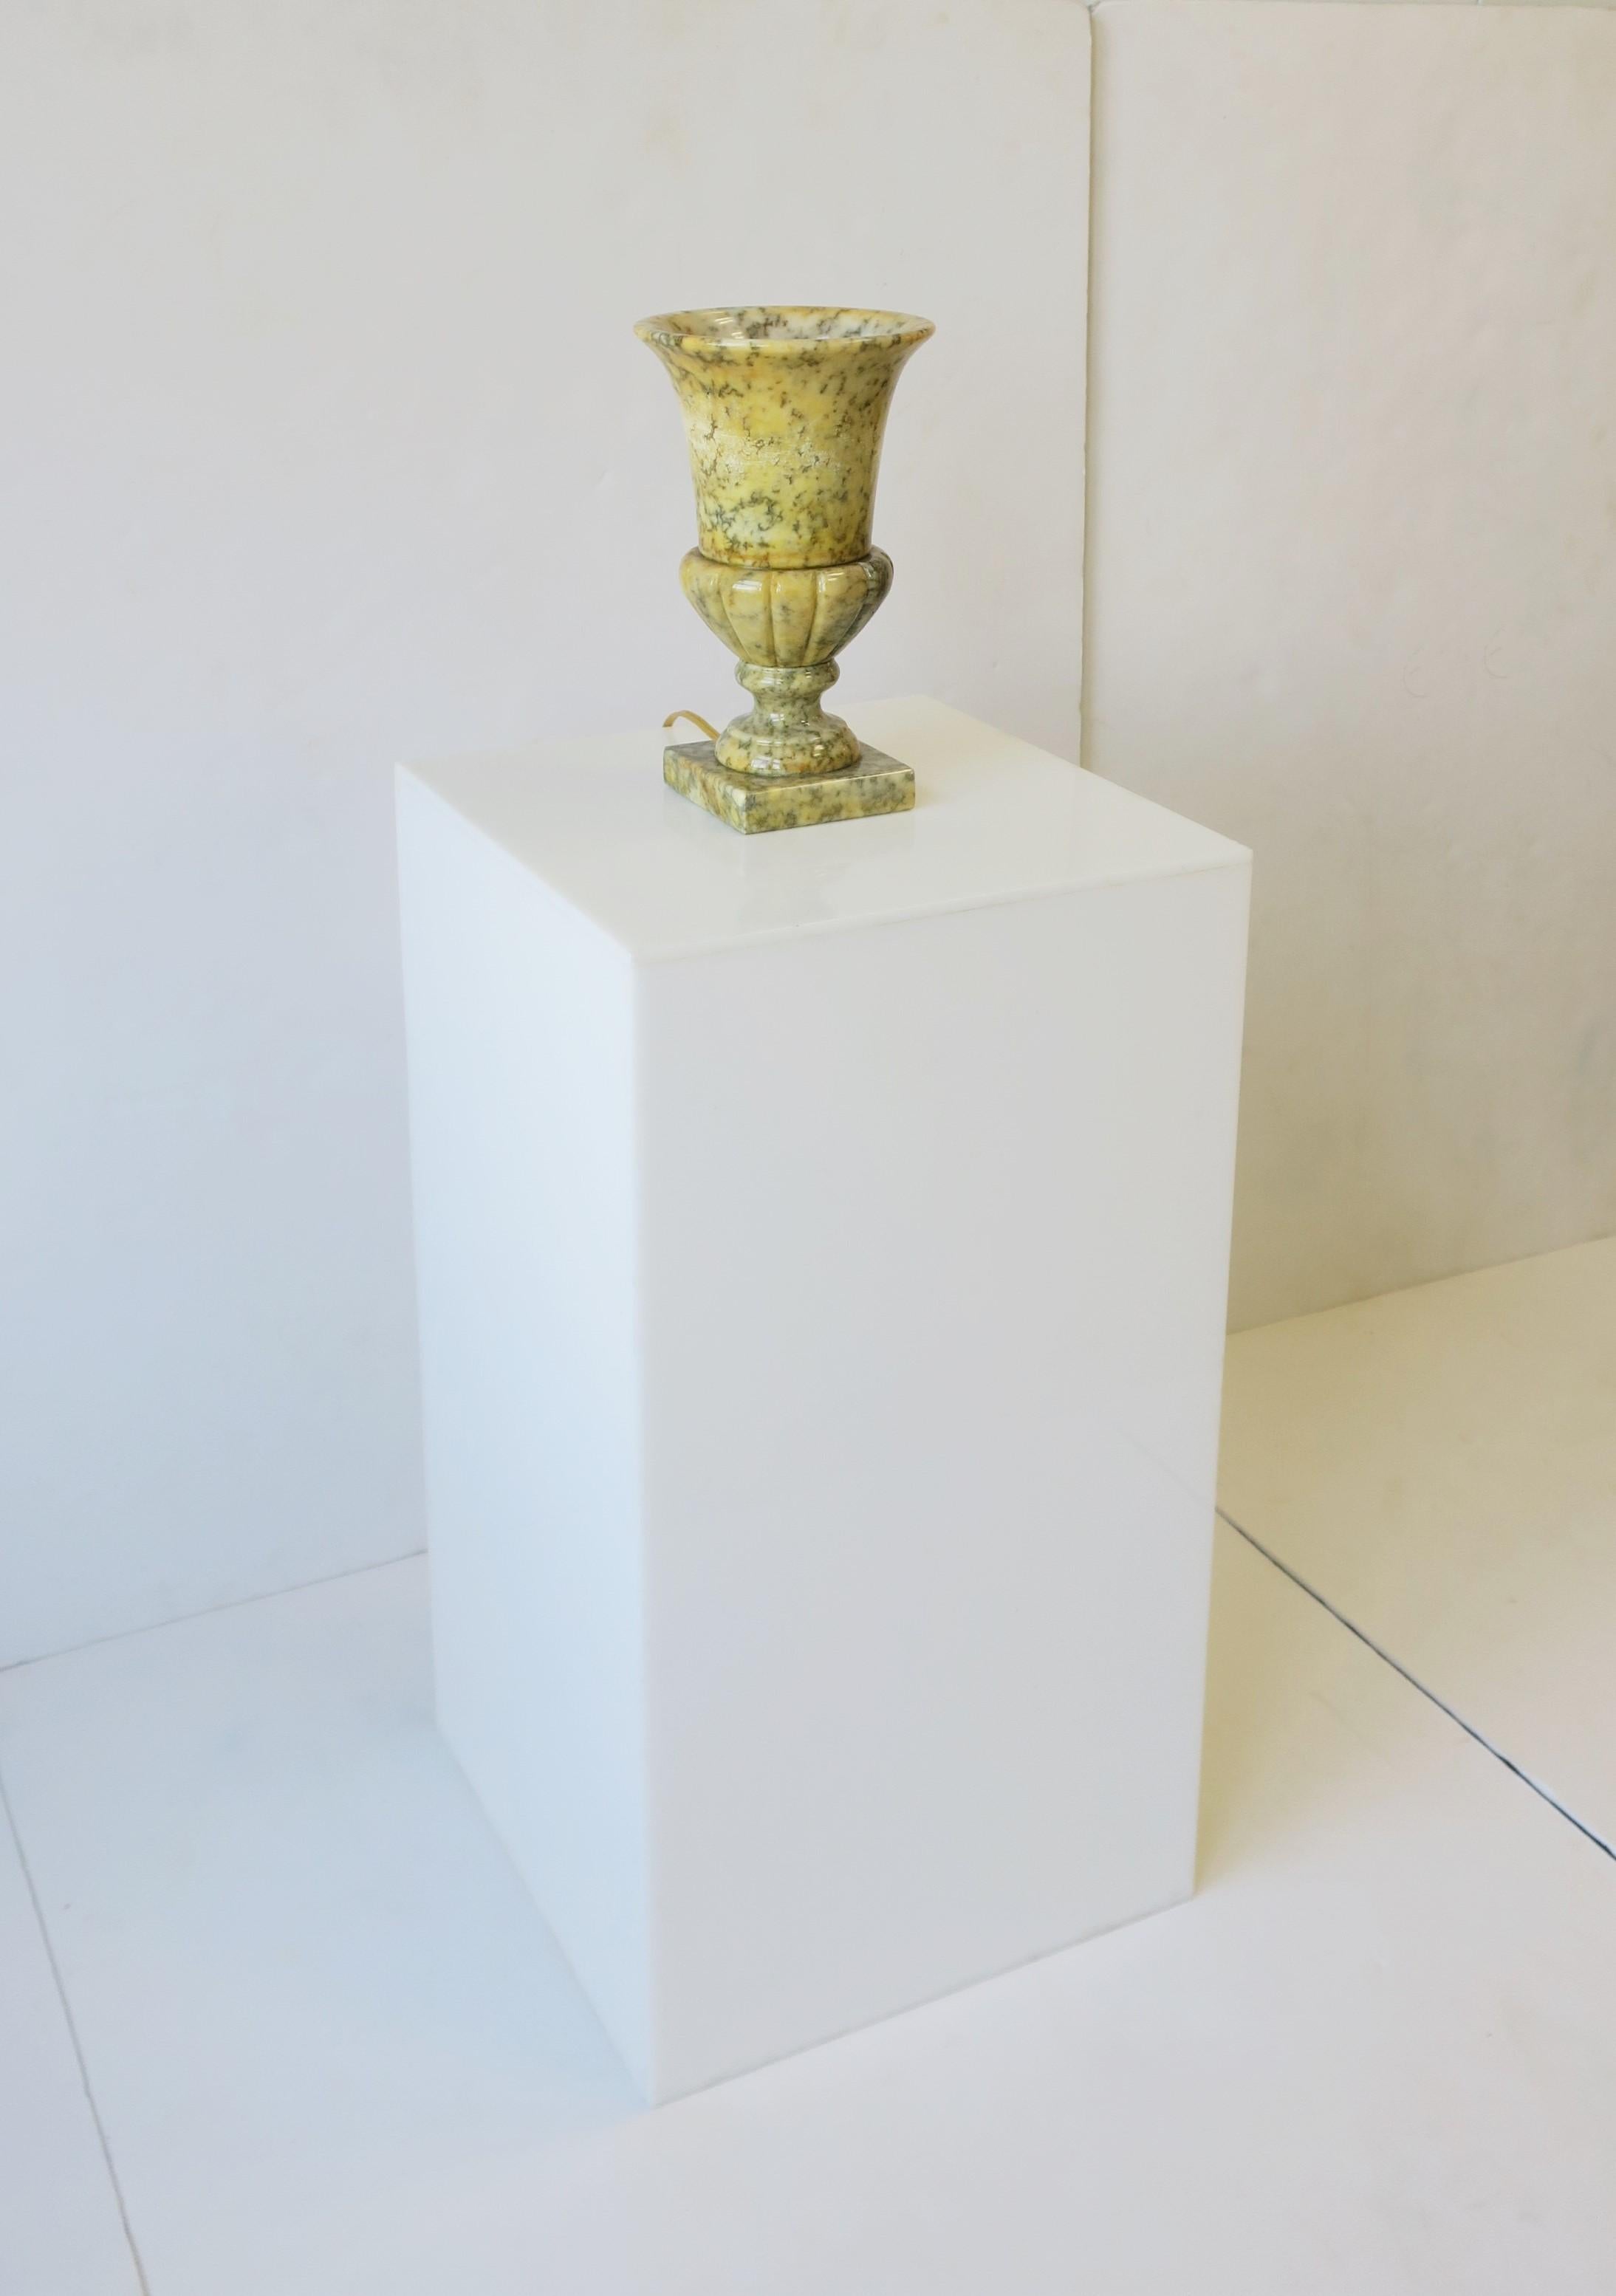 Italian Neoclassical Urn Alabaster Marble Table Lamp, Mid 20th century In Good Condition For Sale In New York, NY